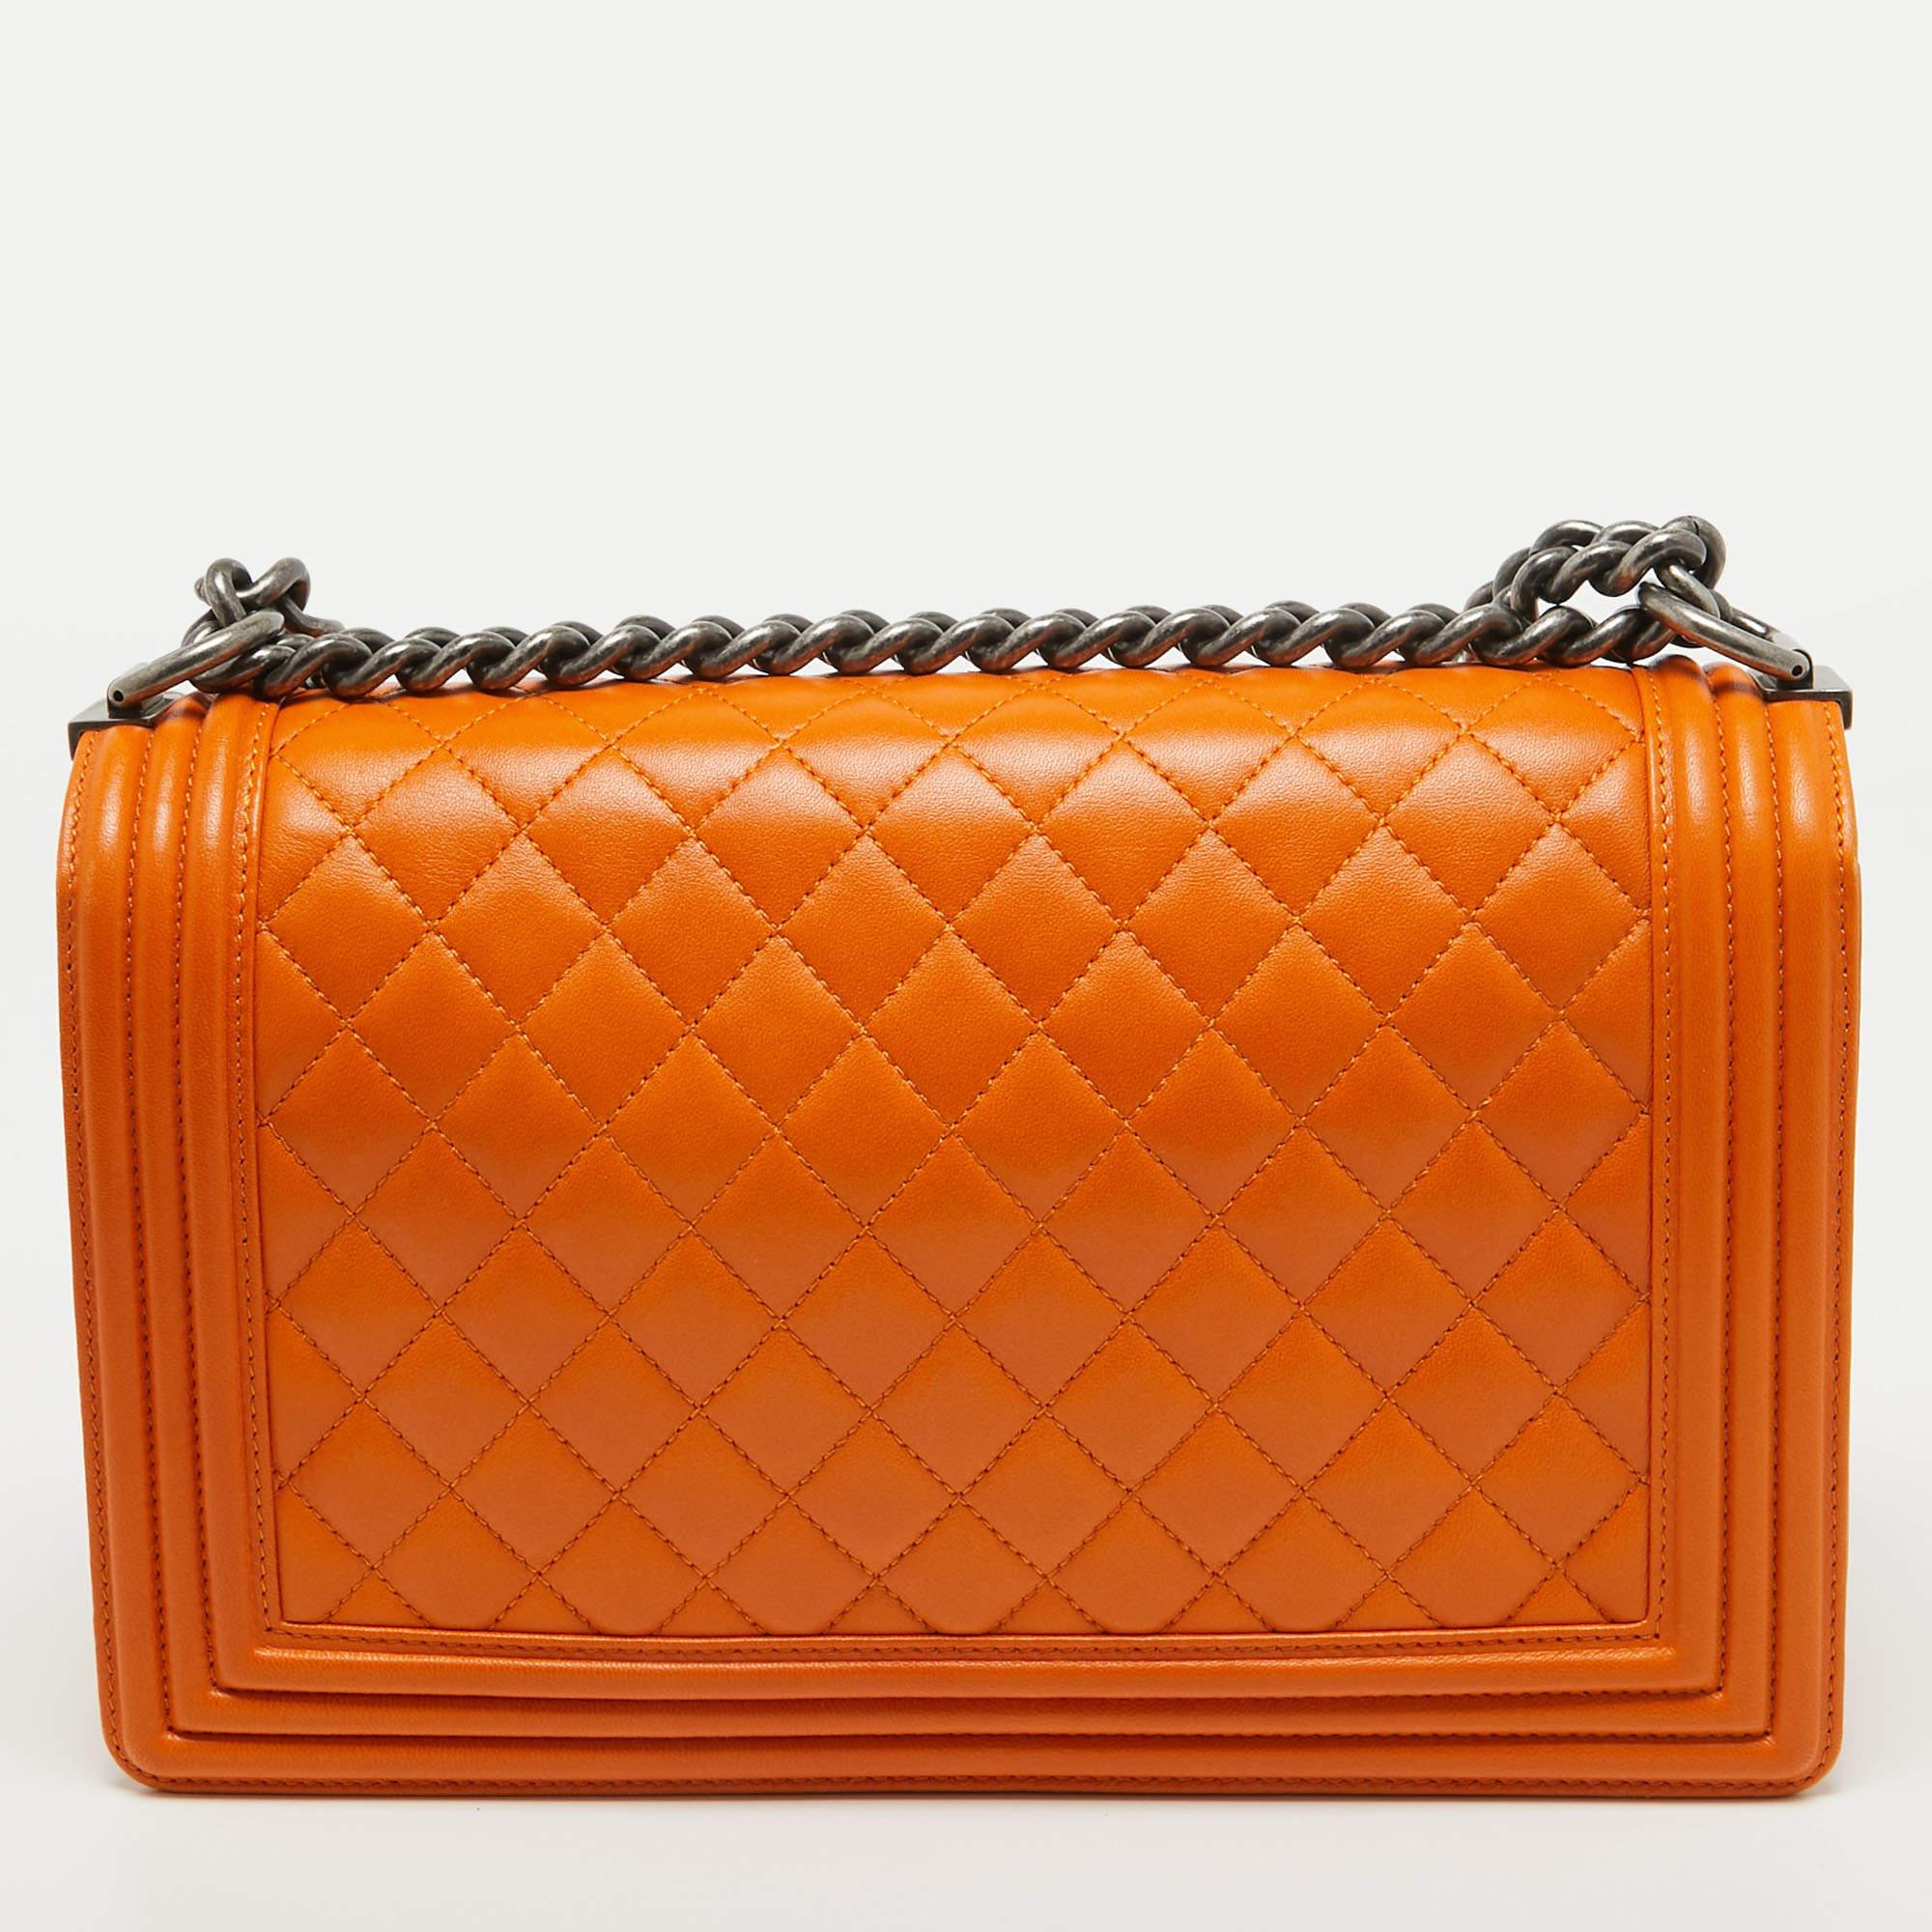 Chanel Orange Quilted Leather New Medium Boy Bag For Sale 3